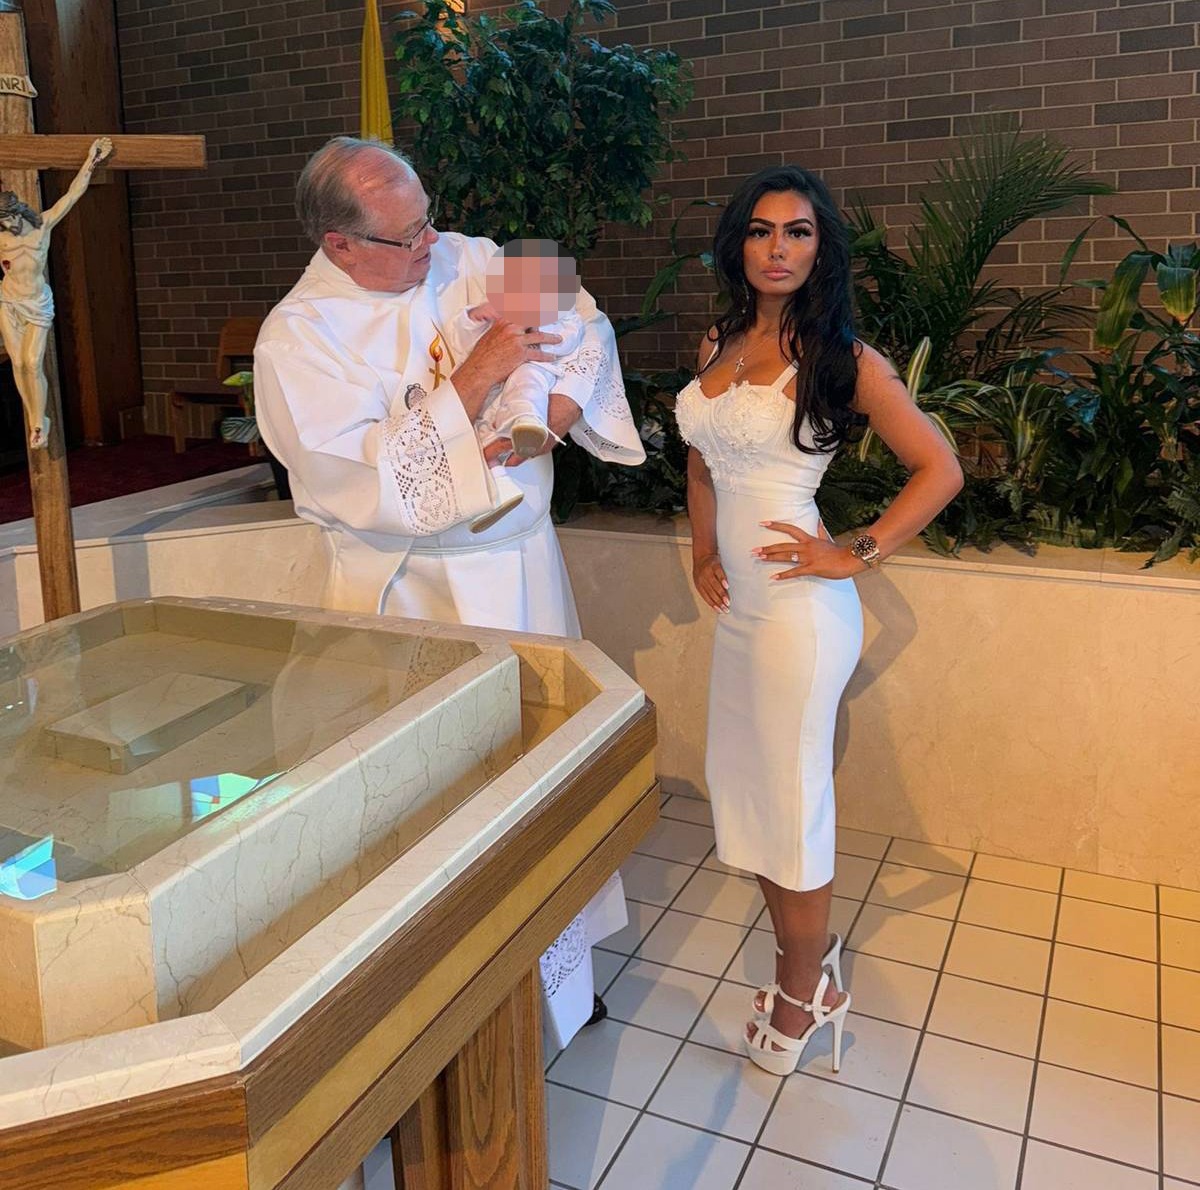 ‘So iconic’ people say as glam mum is posing at her baby’s christening – but some say they’re ‘praying’ for the tot